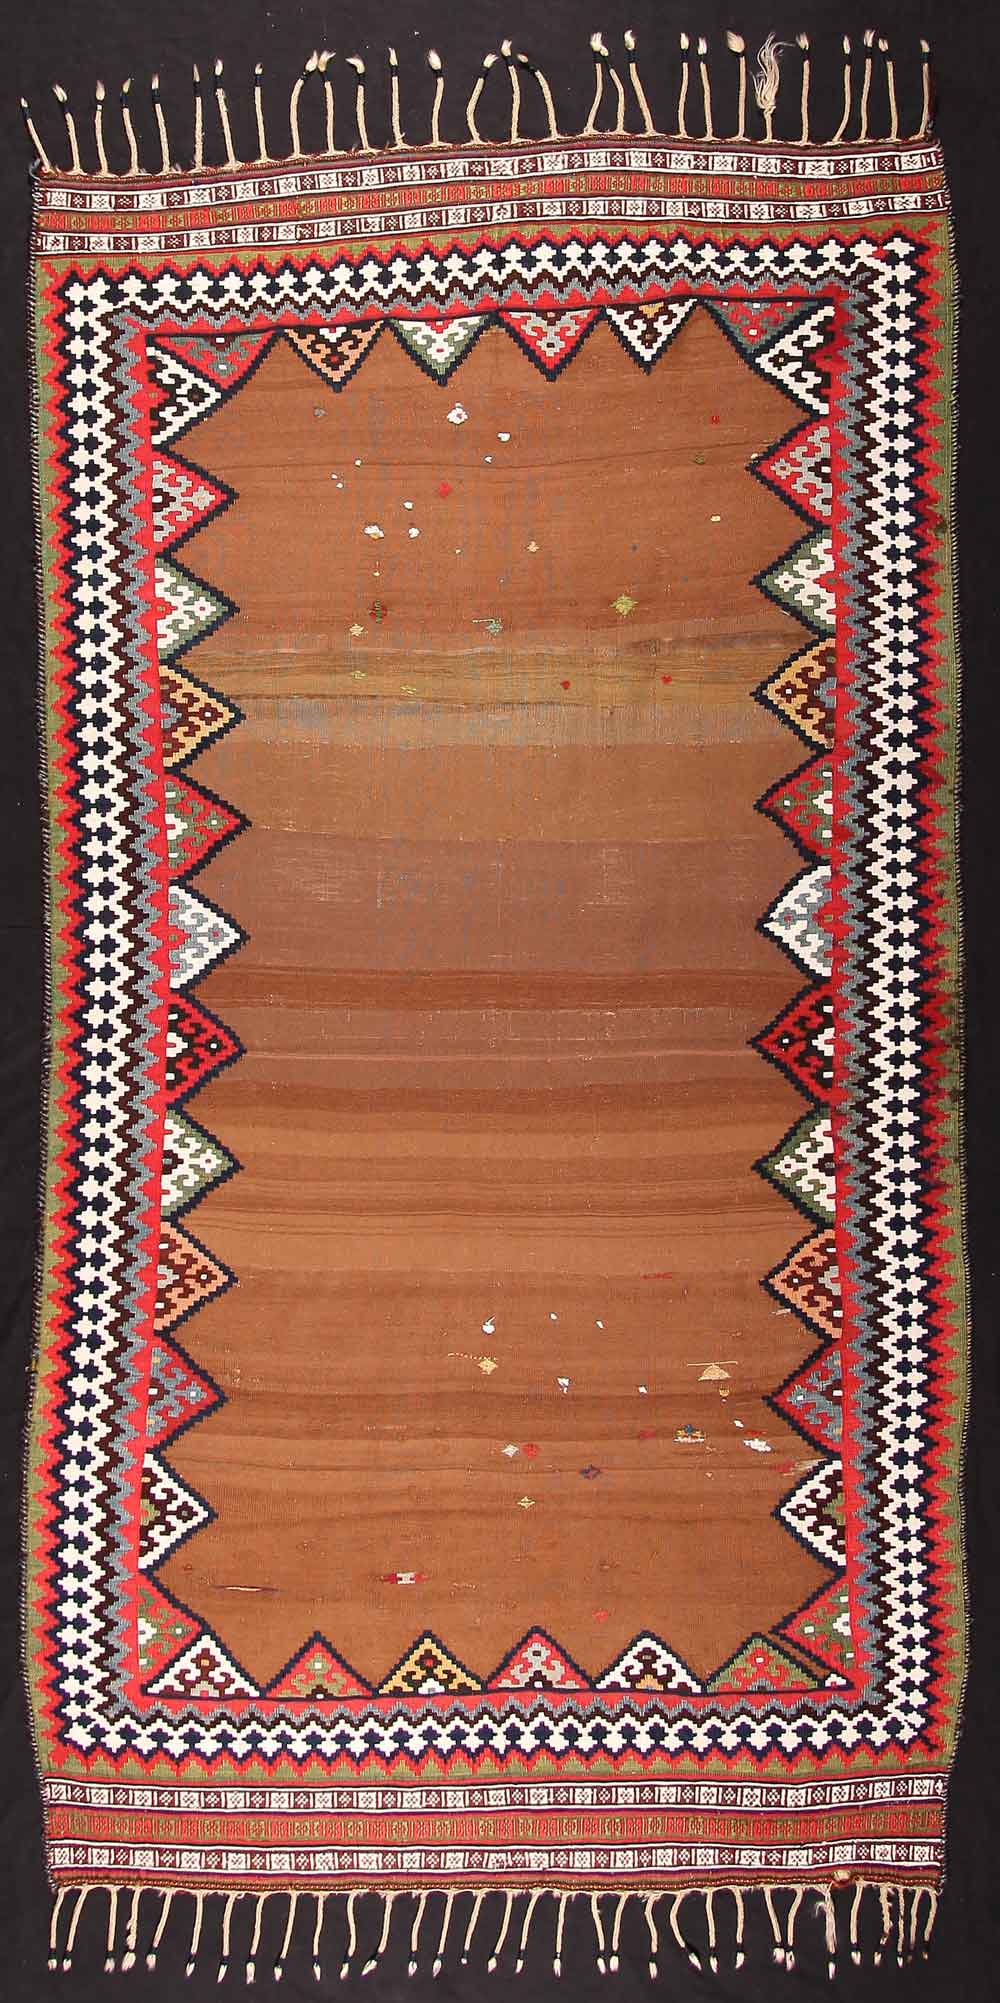 Kilim, late 19th century South-Persia, Fars region, Ghashghai nomads 154 x 280 cm. Neiriz Collection on view in 100 Kilims at Halle  